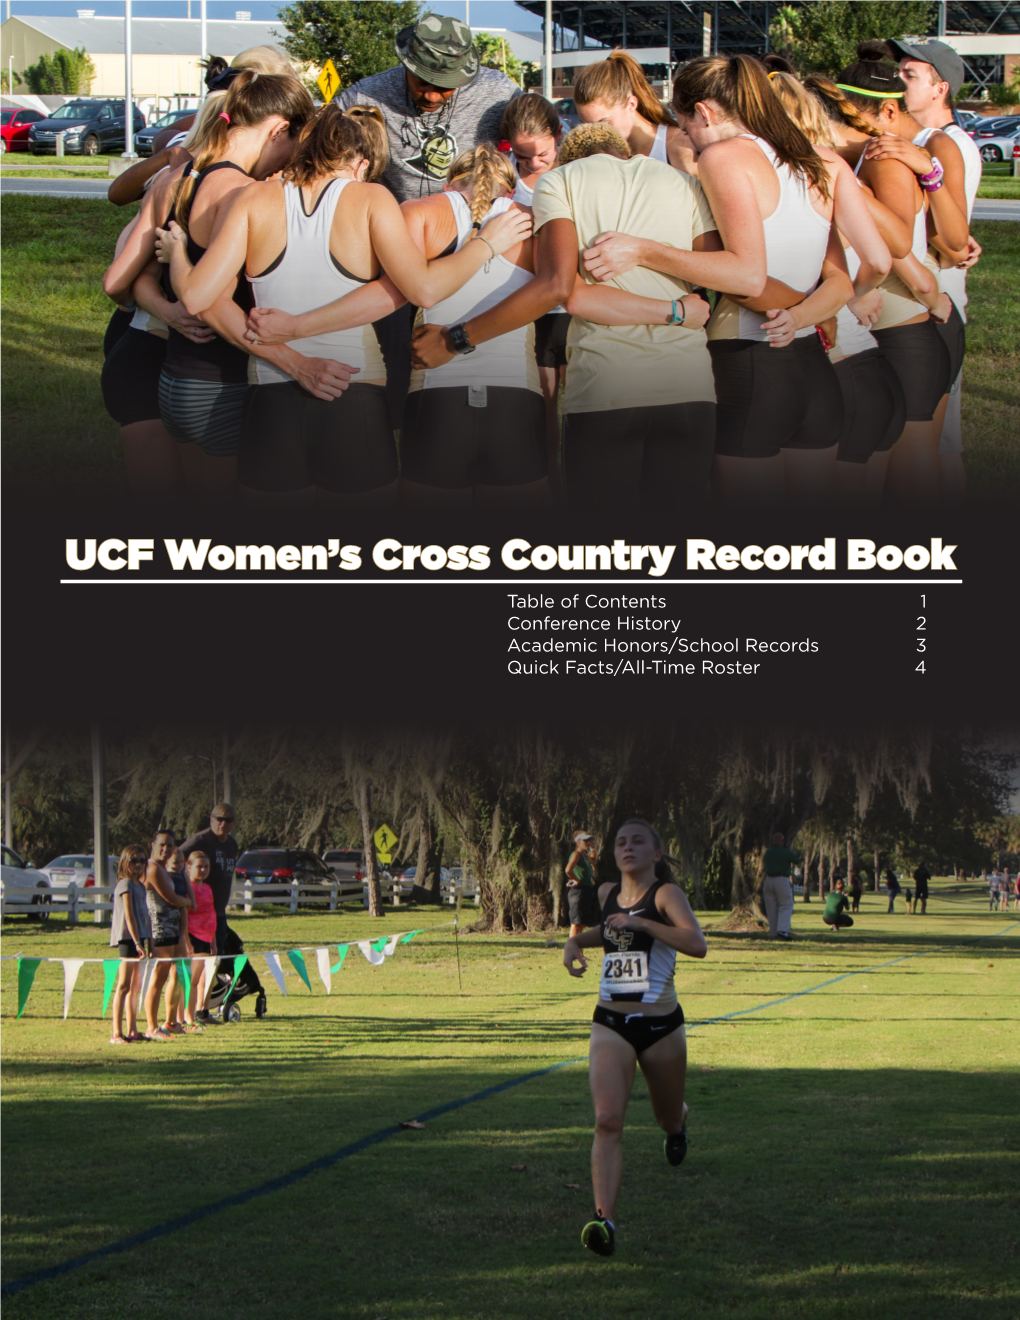 UCF Women's Cross Country Record Book